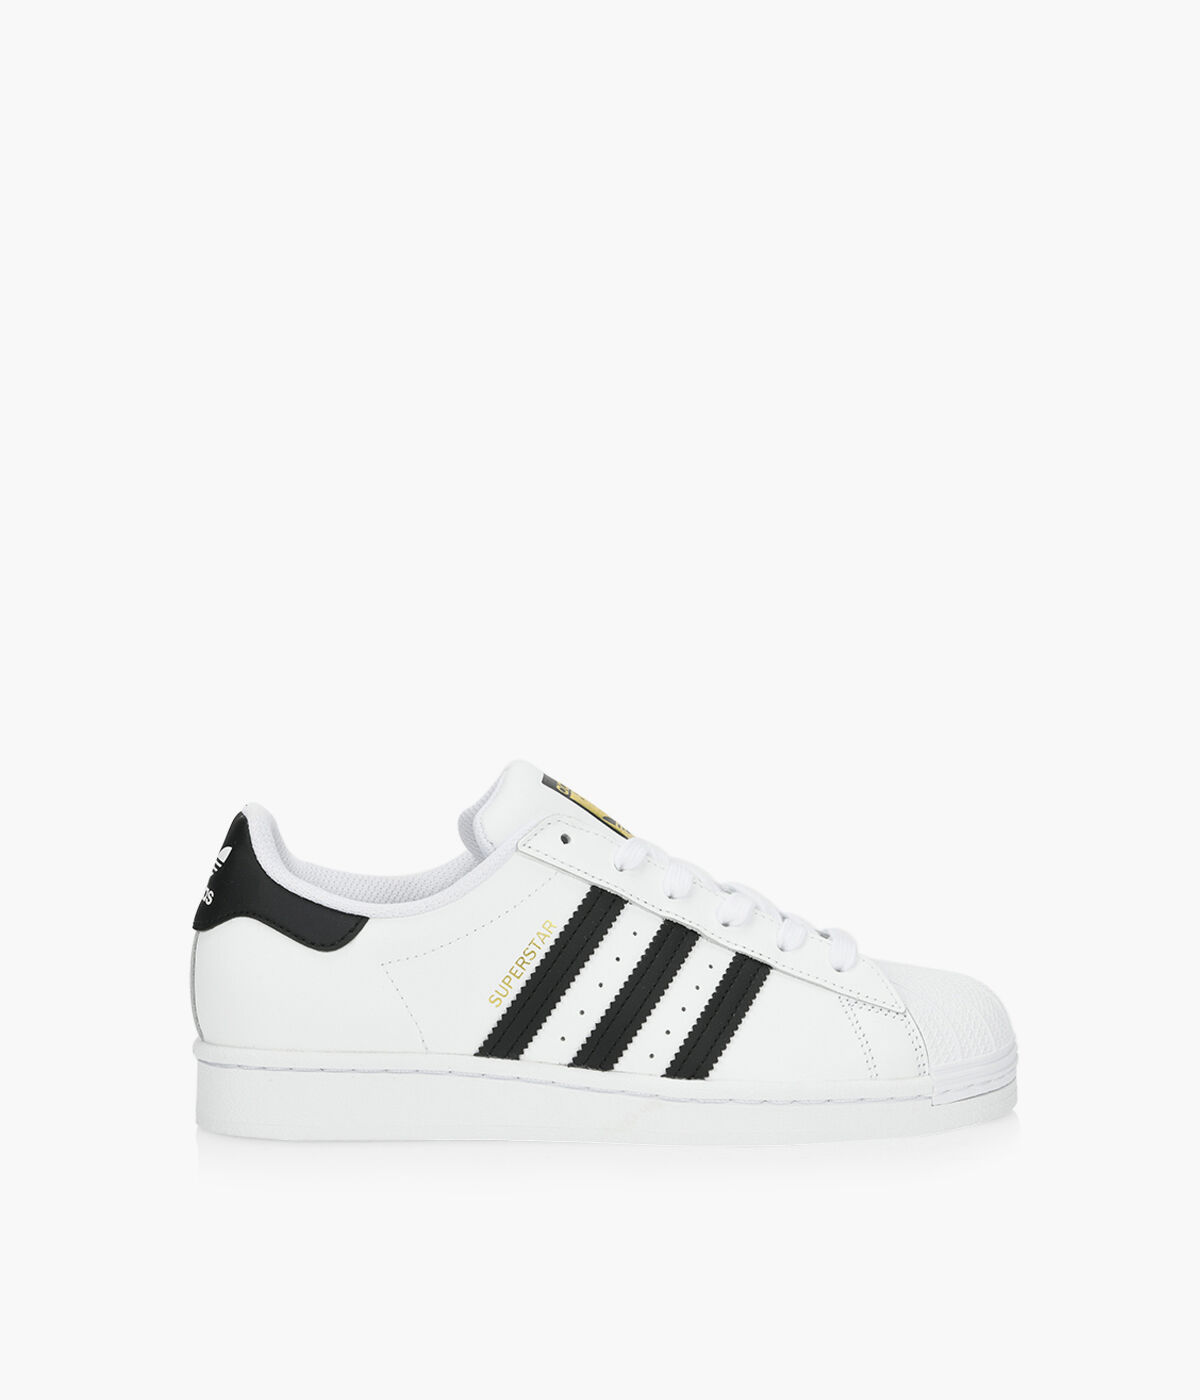 do adidas superstars fit true to size